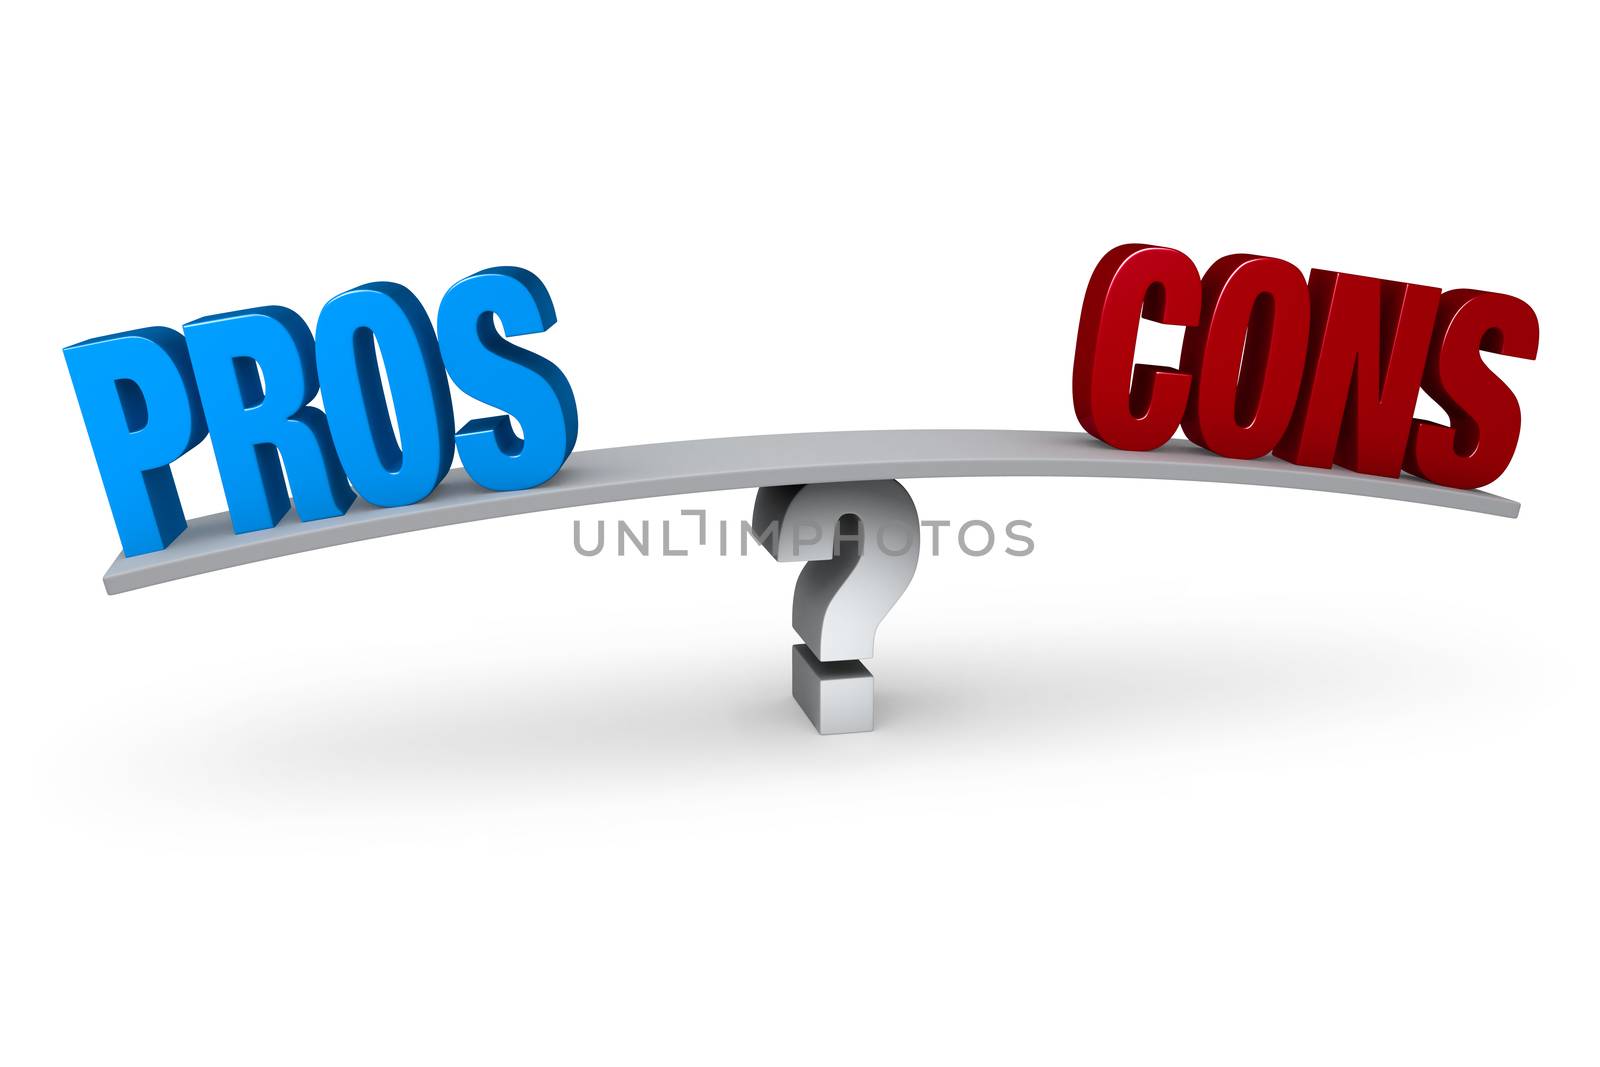 A bright, blue "PROS" and a red "CONS" sit on opposite ends of a gray board which is balanced on a white question mark. Isolated on white.